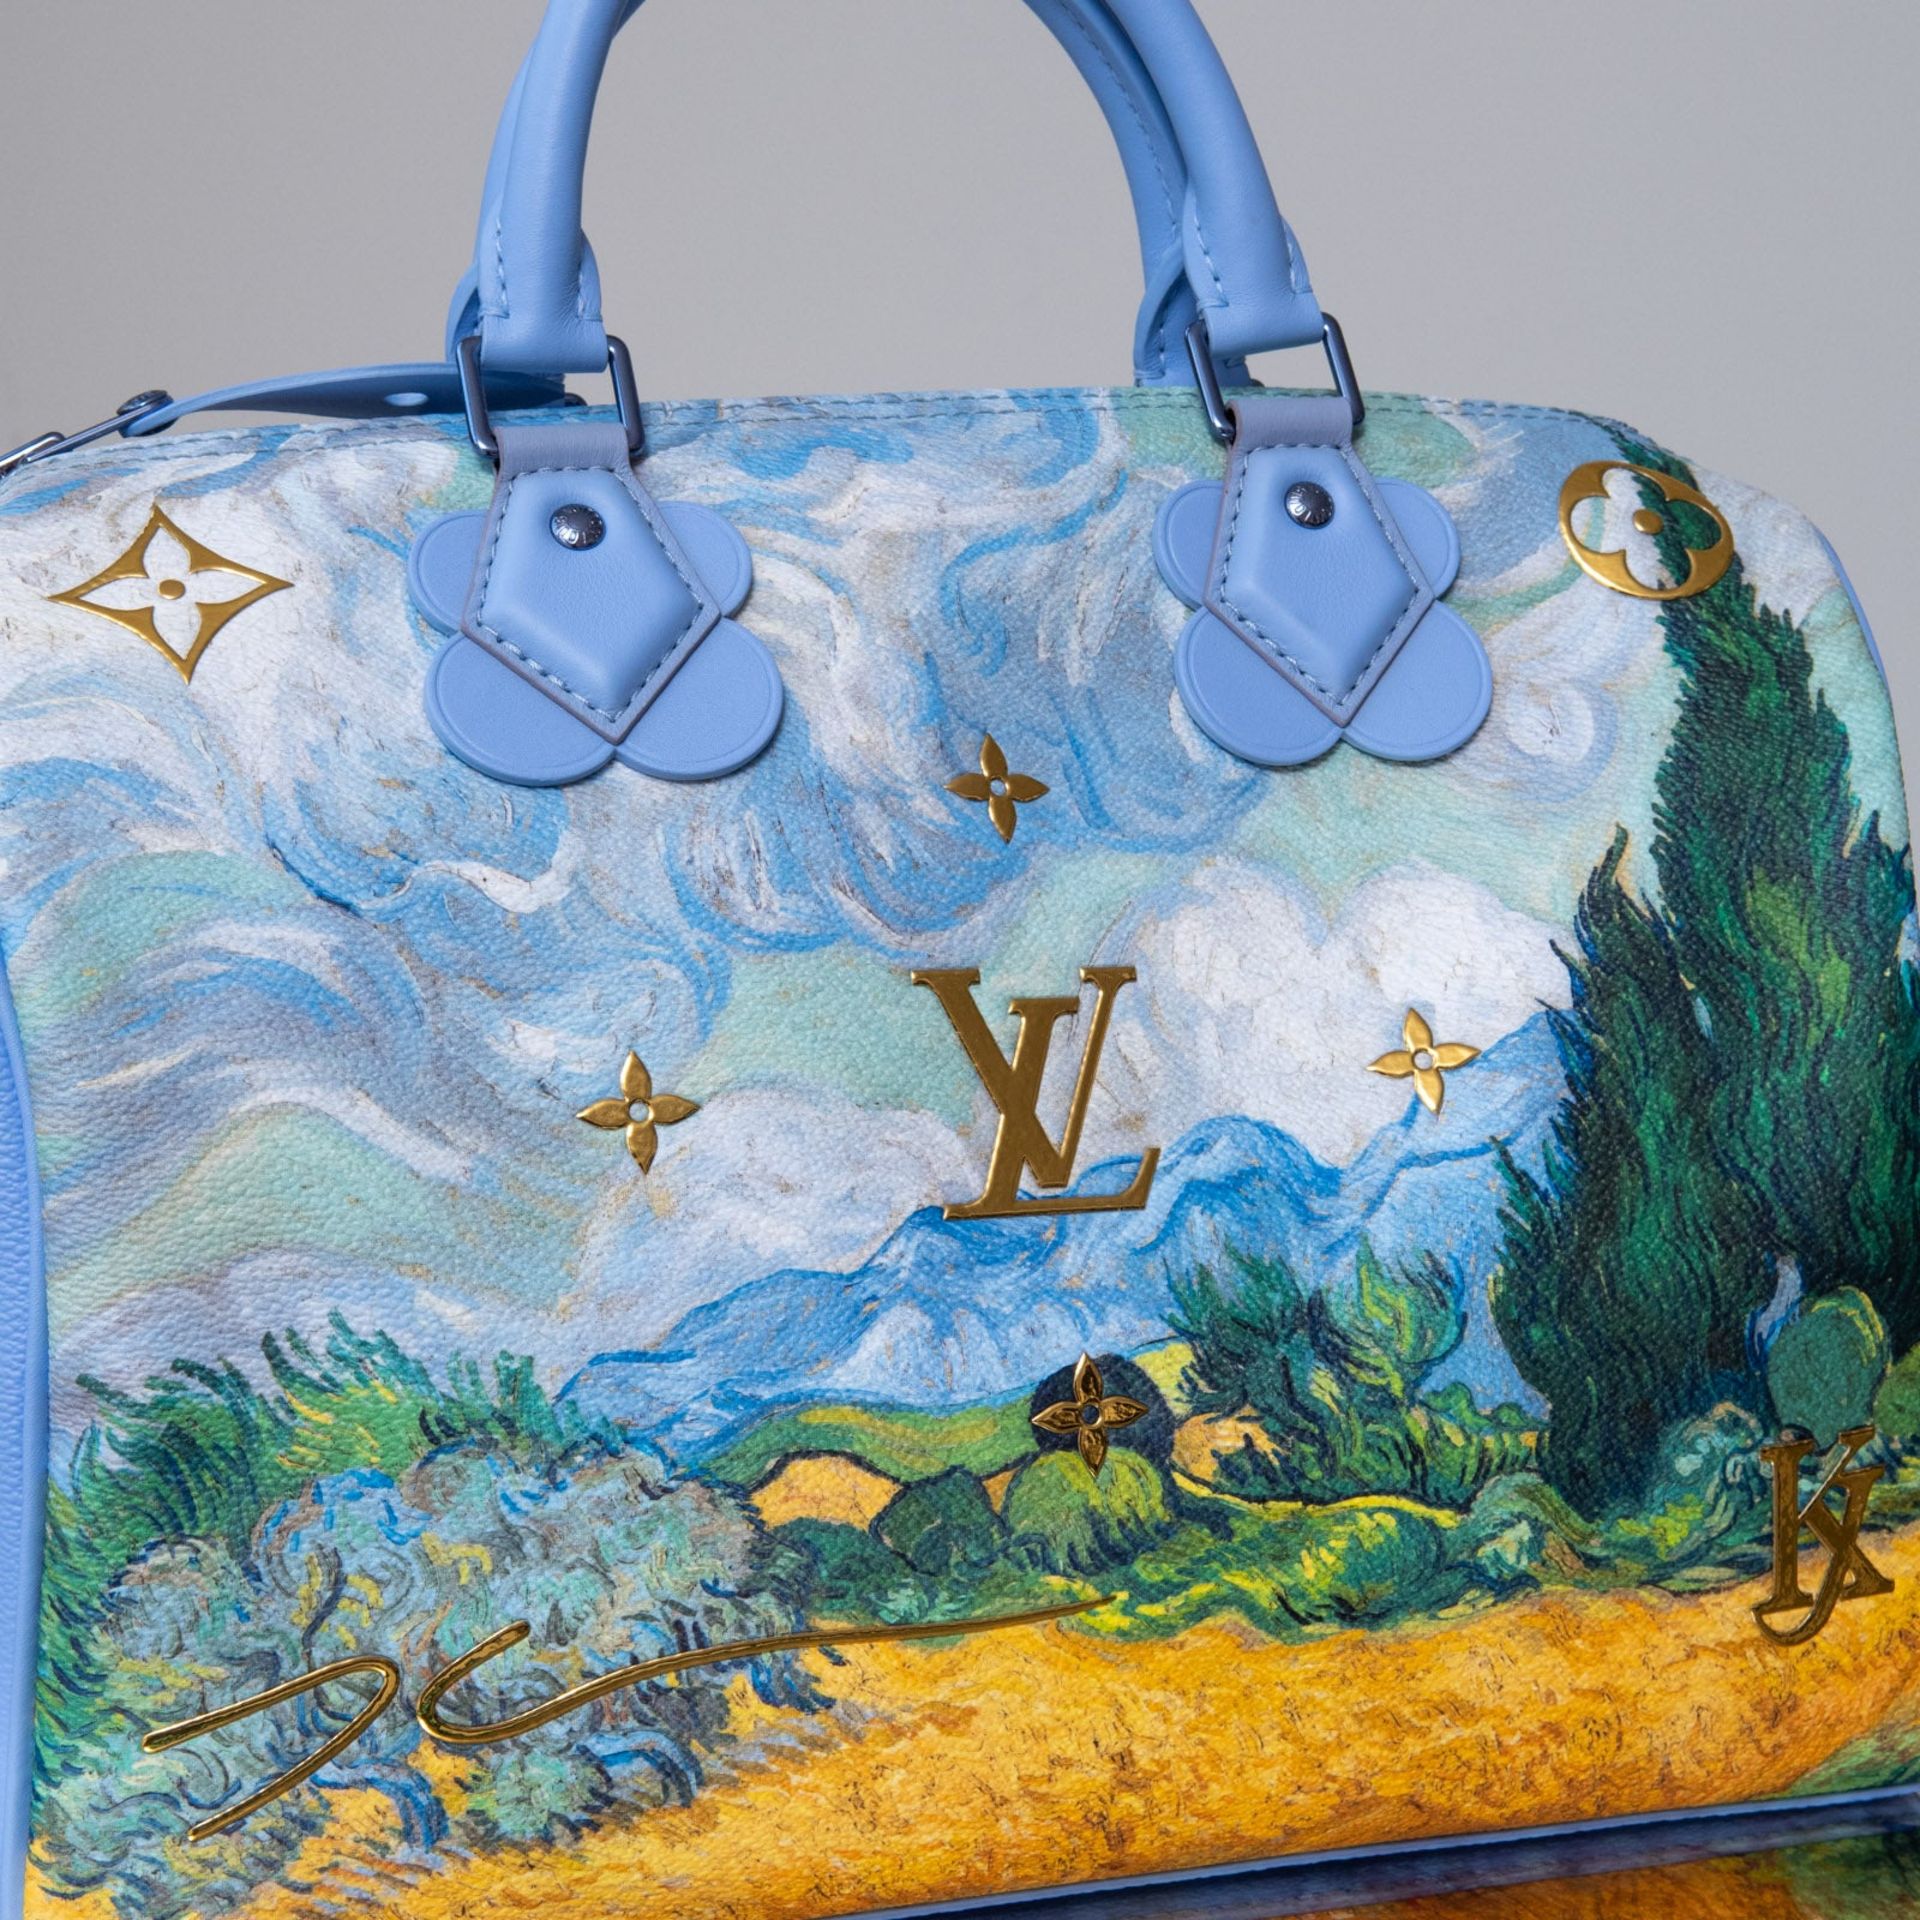 Louis Vuitton Limited Edition Lavender Speedy 30 Jeff Koons Van Gogh Masters Collection - Image 6 of 18